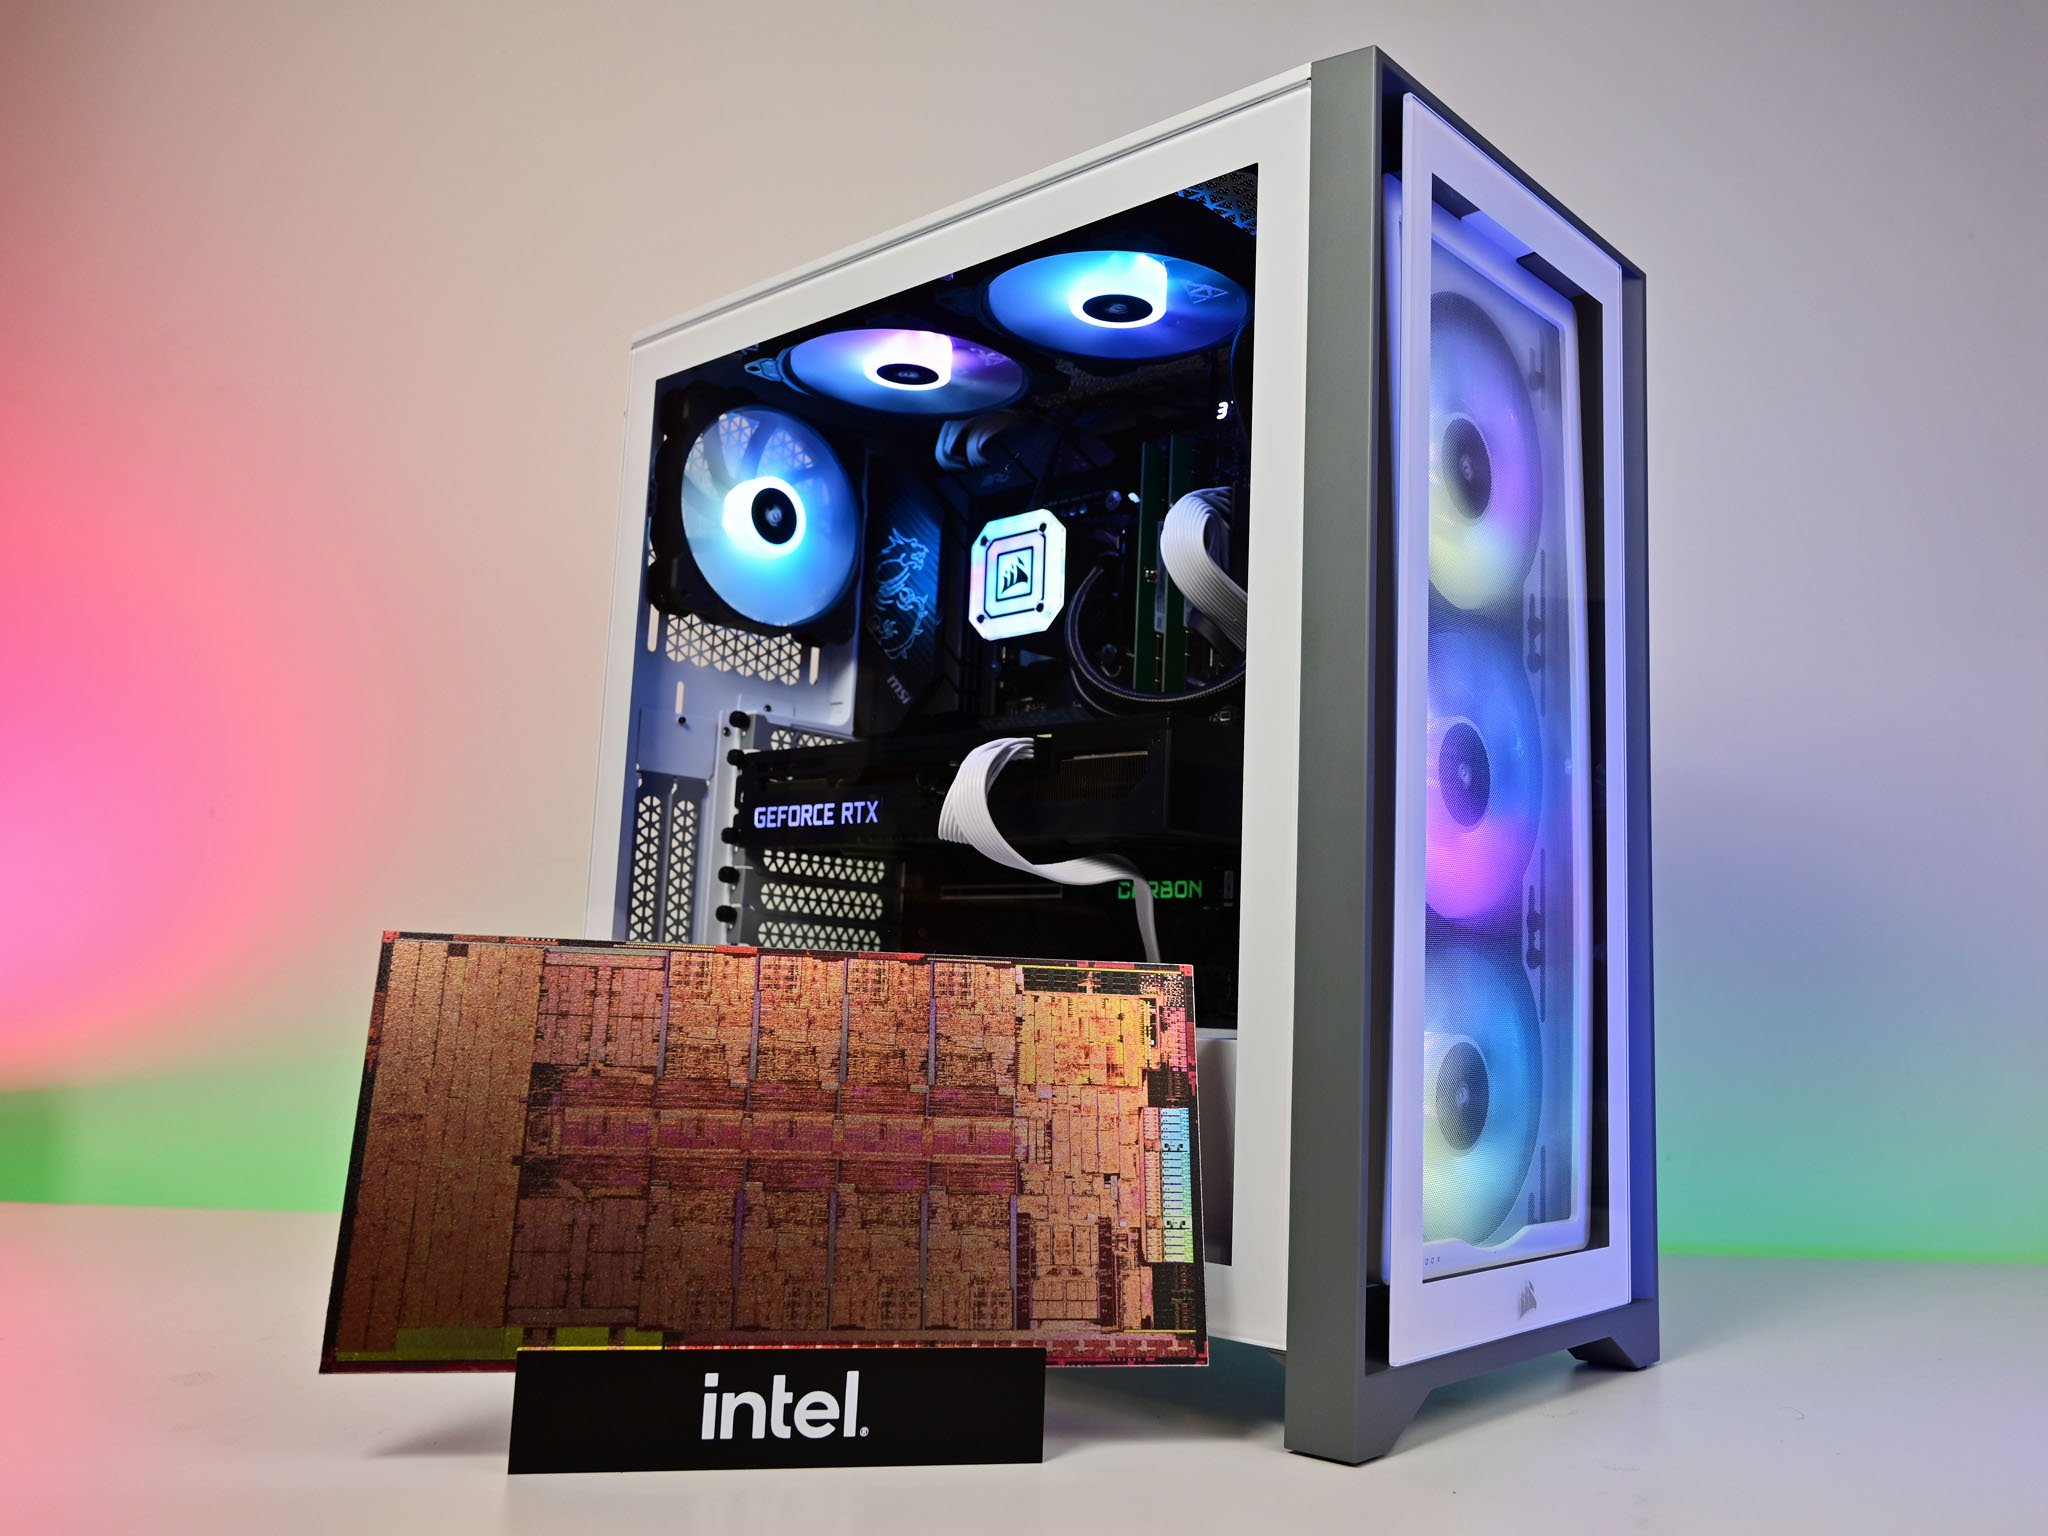 Did Intel’s 12th Gen Alder Lake CPUs put the company back on top?